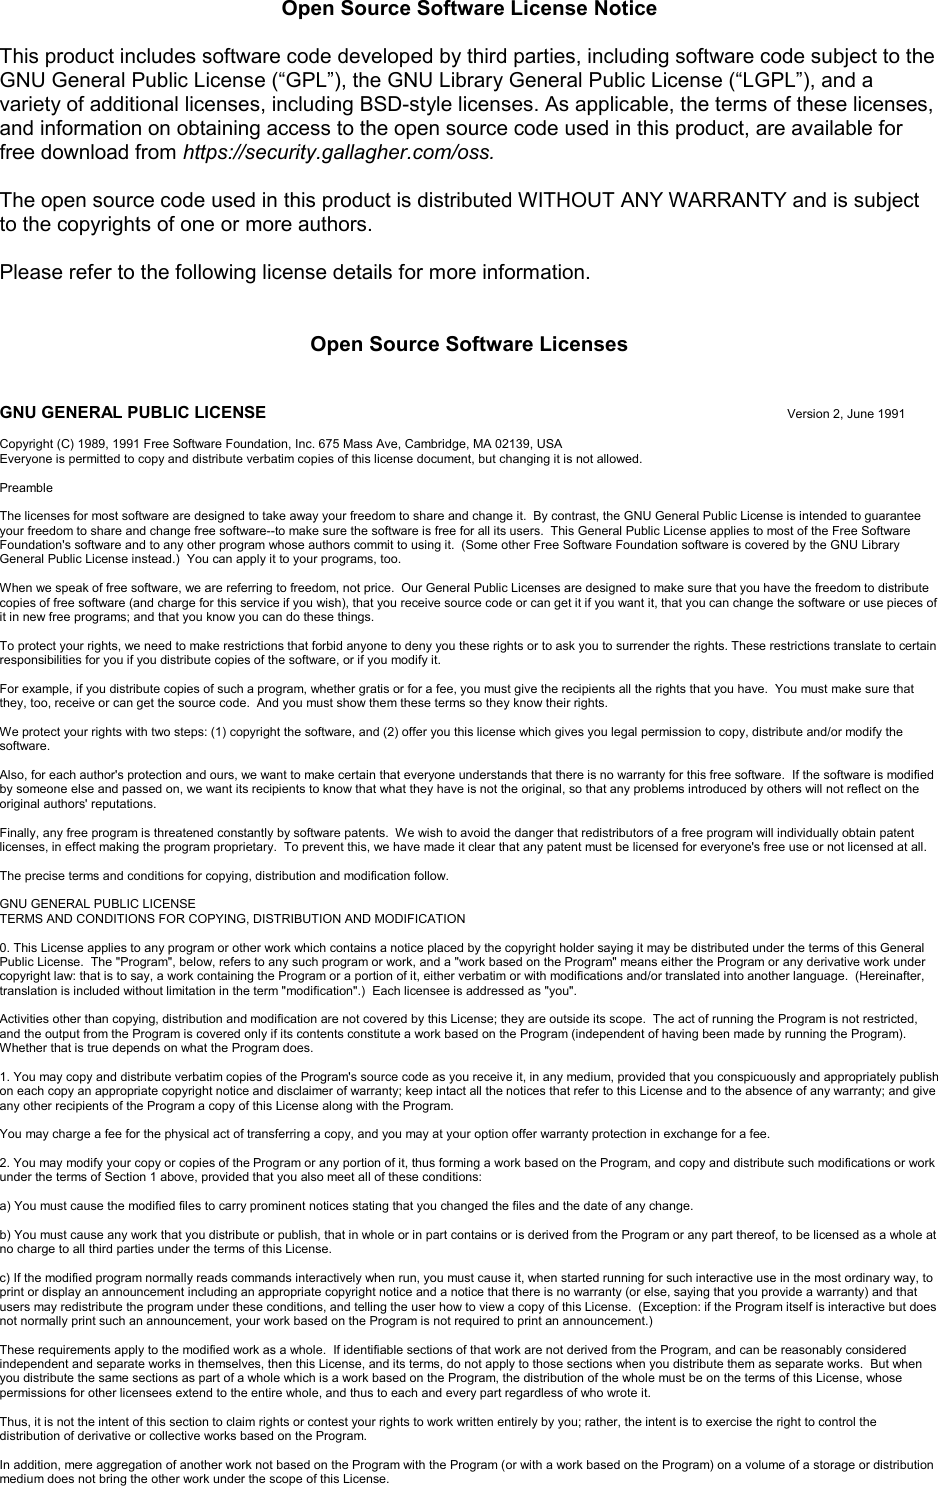 Open Source Software License NoticeThis product includes software code developed by third parties, including software code subject to the GNU General Public License (“GPL”), the GNU Library General Public License (“LGPL”), and a variety of additional licenses, including BSD-style licenses.As applicable, the terms of these licenses,and information on obtaining access to the open source code used in this product, are available for free download from https://security.gallagher.com/oss.The open source code used in this product is distributed WITHOUT ANY WARRANTY and is subjectto the copyrights of one or more authors. Please refer to the following license details for more information.Open Source Software LicensesGNU GENERAL PUBLIC LICENSE Version 2, June 1991Copyright (C) 1989, 1991 Free Software Foundation, Inc. 675 Mass Ave, Cambridge, MA 02139, USAEveryone is permitted to copy and distribute verbatim copies of this license document, but changing it is not allowed.PreambleThe licenses for most software are designed to take away your freedom to share and change it.  By contrast, the GNU General Public License is intended to guarantee your freedom to share and change free software--to make sure the software is free for all its users.  This General Public License applies to most of the Free SoftwareFoundation&apos;s software and to any other program whose authors commit to using it.  (Some other Free Software Foundation software is covered by the GNU Library General Public License instead.)  You can apply it to your programs, too.When we speak of free software, we are referring to freedom, not price.  Our General Public Licenses are designed to make sure that you have the freedom to distribute copies of free software (and charge for this service if you wish), that you receive source code or can get it if you want it, that you can change the software or use pieces of it in new free programs; and that you know you can do these things.To protect your rights, we need to make restrictions that forbid anyone to deny you these rights or to ask you to surrender the rights. These restrictions translate to certain responsibilities for you if you distribute copies of the software, or if you modify it.For example, if you distribute copies of such a program, whether gratis or for a fee, you must give the recipients all the rights that you have.  You must make sure that they, too, receive or can get the source code.  And you must show them these terms so they know their rights.We protect your rights with two steps: (1) copyright the software, and (2) offer you this license which gives you legal permission to copy, distribute and/or modify the software.Also, for each author&apos;s protection and ours, we want to make certain that everyone understands that there is no warranty for this free software.  If the software is modified by someone else and passed on, we want its recipients to know that what they have is not the original, so that any problems introduced by others will not reflect on the original authors&apos; reputations.Finally, any free program is threatened constantly by software patents.  We wish to avoid the danger that redistributors of a free program will individually obtain patent licenses, in effect making the program proprietary.  To prevent this, we have made it clear that any patent must be licensed for everyone&apos;s free use or not licensed at all.The precise terms and conditions for copying, distribution and modification follow.GNU GENERAL PUBLIC LICENSETERMS AND CONDITIONS FOR COPYING, DISTRIBUTION AND MODIFICATION0. This License applies to any program or other work which contains a notice placed by the copyright holder saying it may be distributed under the terms of this GeneralPublic License.  The &quot;Program&quot;, below, refers to any such program or work, and a &quot;work based on the Program&quot; means either the Program or any derivative work under copyright law: that is to say, a work containing the Program or a portion of it, either verbatim or with modifications and/or translated into another language.  (Hereinafter, translation is included without limitation in the term &quot;modification&quot;.)  Each licensee is addressed as &quot;you&quot;.Activities other than copying, distribution and modification are not covered by this License; they are outside its scope.  The act of running the Program is not restricted, and the output from the Program is covered only if its contents constitute a work based on the Program (independent of having been made by running the Program).Whether that is true depends on what the Program does.1. You may copy and distribute verbatim copies of the Program&apos;s source code as you receive it, in any medium, provided that you conspicuously and appropriately publish on each copy an appropriate copyright notice and disclaimer of warranty; keep intact all the notices that refer to this License and to the absence of any warranty; and give any other recipients of the Program a copy of this License along with the Program.You may charge a fee for the physical act of transferring a copy, and you may at your option offer warranty protection in exchange for a fee.2. You may modify your copy or copies of the Program or any portion of it, thus forming a work based on the Program, and copy and distribute such modifications or workunder the terms of Section 1 above, provided that you also meet all of these conditions:a) You must cause the modified files to carry prominent notices stating that you changed the files and the date of any change.b) You must cause any work that you distribute or publish, that in whole or in part contains or is derived from the Program or any part thereof, to be licensed as a whole atno charge to all third parties under the terms of this License.c) If the modified program normally reads commands interactively when run, you must cause it, when started running for such interactive use in the most ordinary way, to print or display an announcement including an appropriate copyright notice and a notice that there is no warranty (or else, saying that you provide a warranty) and that users may redistribute the program under these conditions, and telling the user how to view a copy of this License.  (Exception: if the Program itself is interactive but does not normally print such an announcement, your work based on the Program is not required to print an announcement.)These requirements apply to the modified work as a whole.  If identifiable sections of that work are not derived from the Program, and can be reasonably considered independent and separate works in themselves, then this License, and its terms, do not apply to those sections when you distribute them as separate works.  But when you distribute the same sections as part of a whole which is a work based on the Program, the distribution of the whole must be on the terms of this License, whose permissions for other licensees extend to the entire whole, and thus to each and every part regardless of who wrote it.Thus, it is not the intent of this section to claim rights or contest your rights to work written entirely by you; rather, the intent is to exercise the right to control the distribution of derivative or collective works based on the Program.In addition, mere aggregation of another work not based on the Program with the Program (or with a work based on the Program) on a volume of a storage or distribution medium does not bring the other work under the scope of this License.